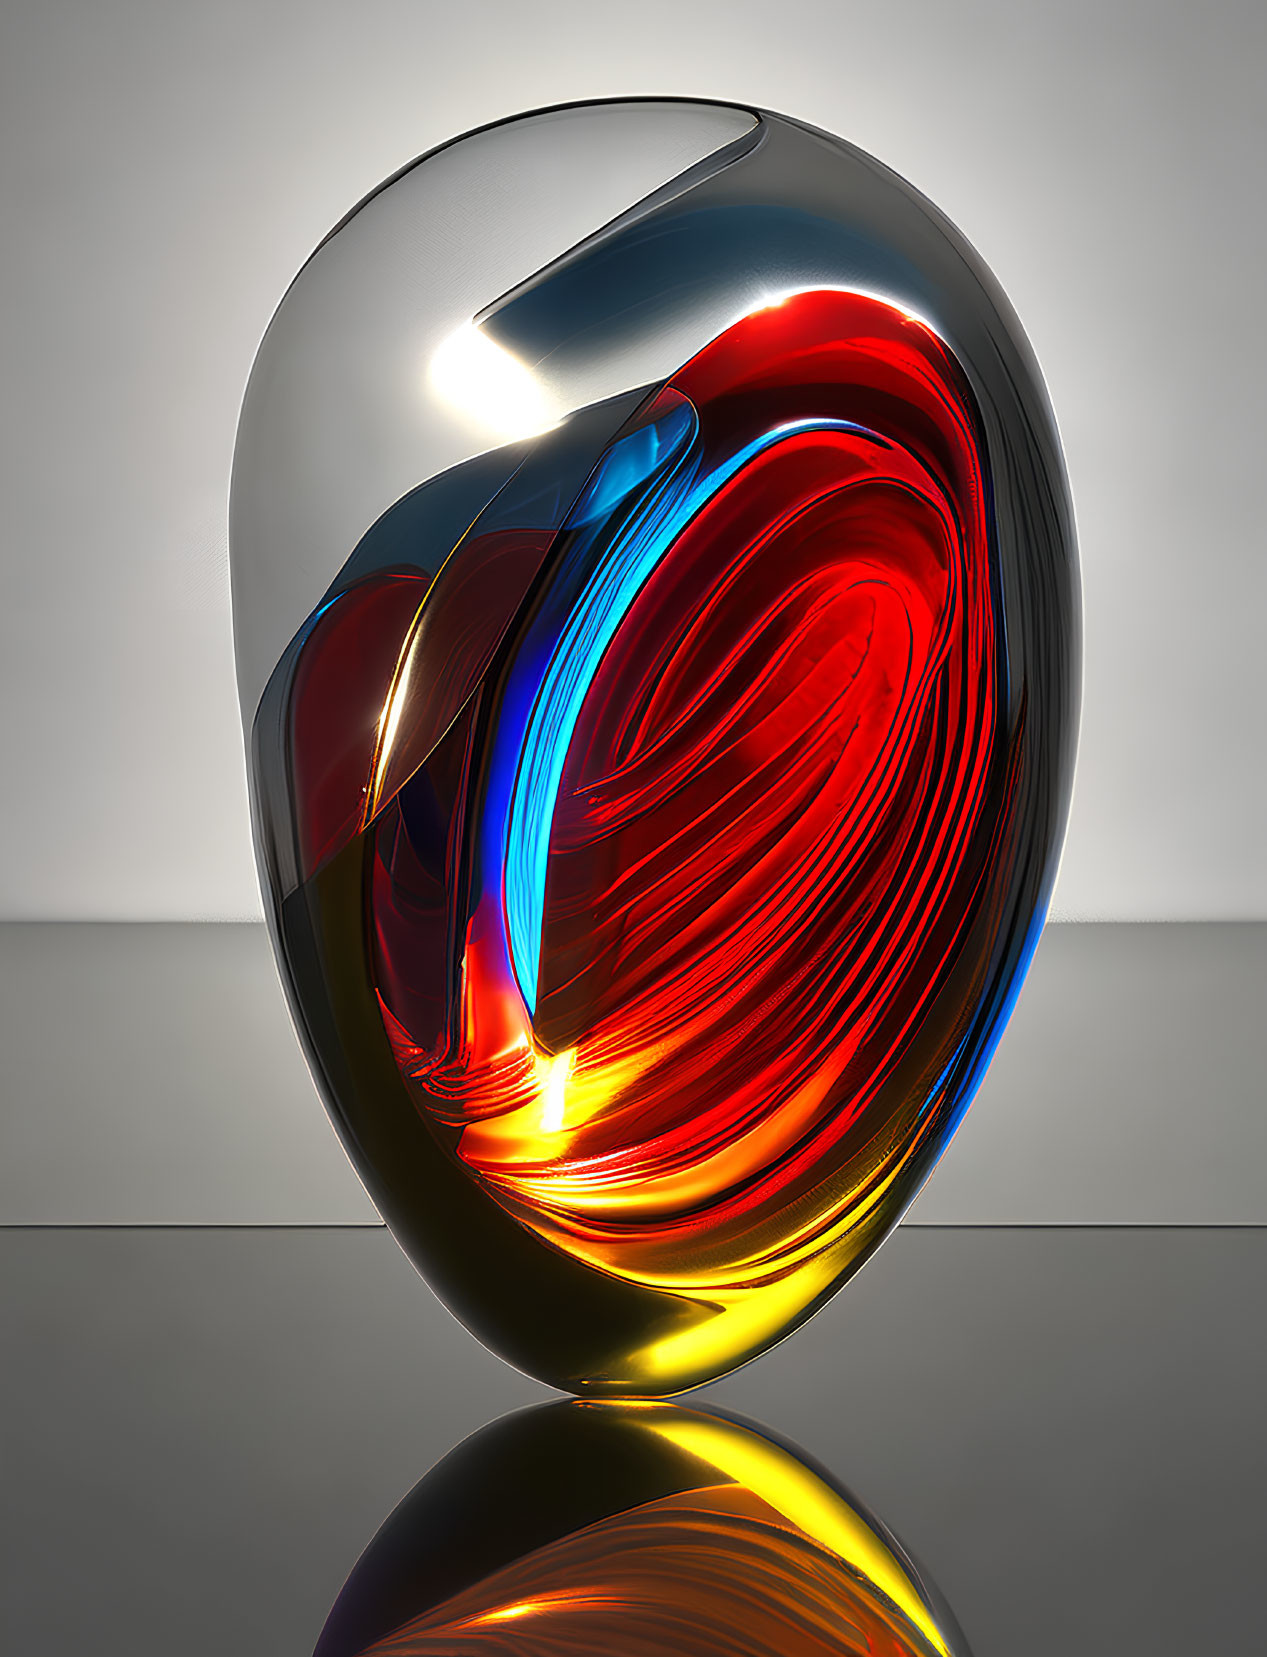 Colorful swirling sculpture encased in clear glass shell